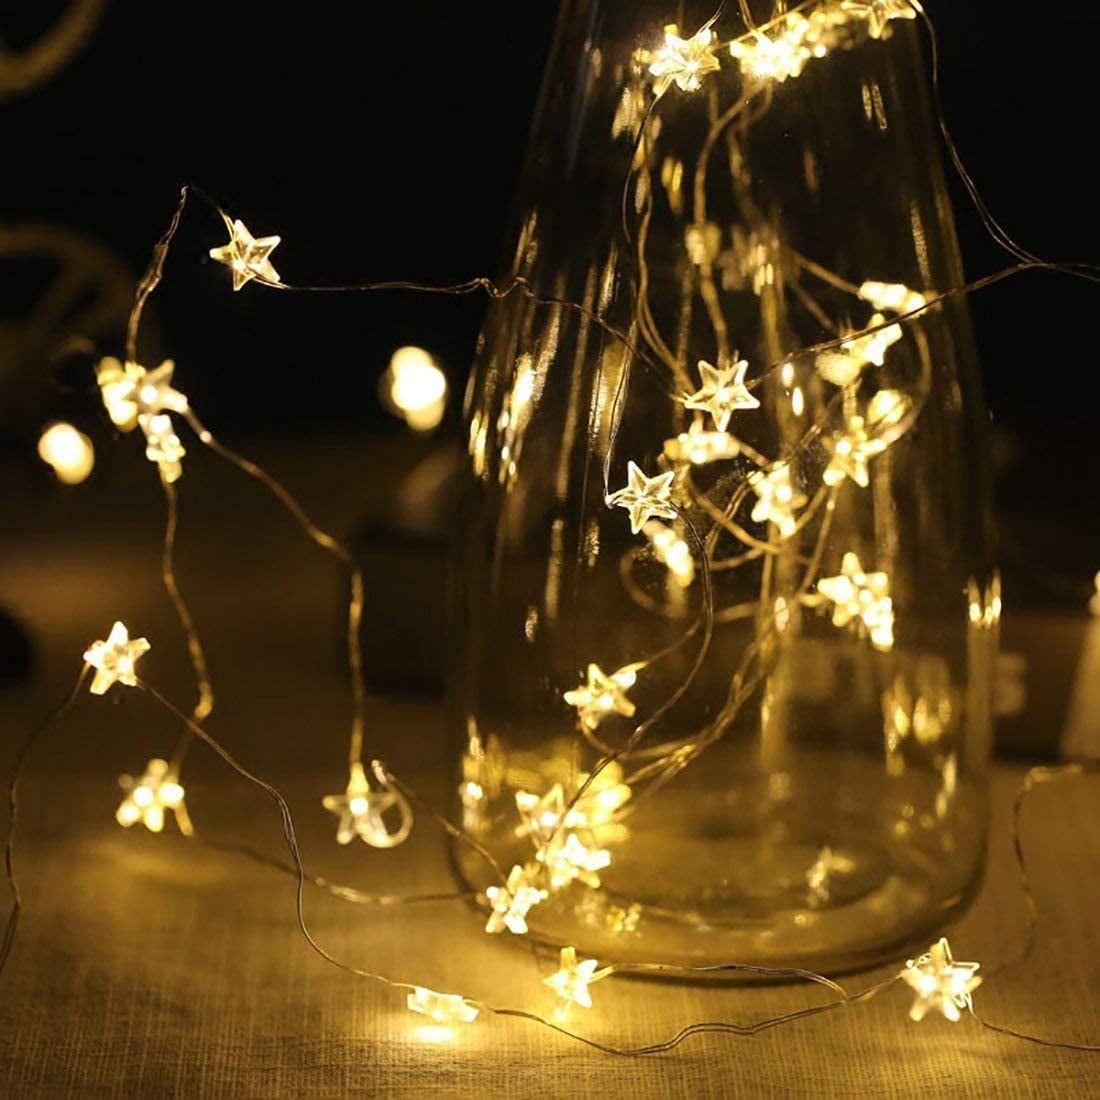 A string of white fairy lights in the shape of stars, placed in a glass vase. - Fairy lights